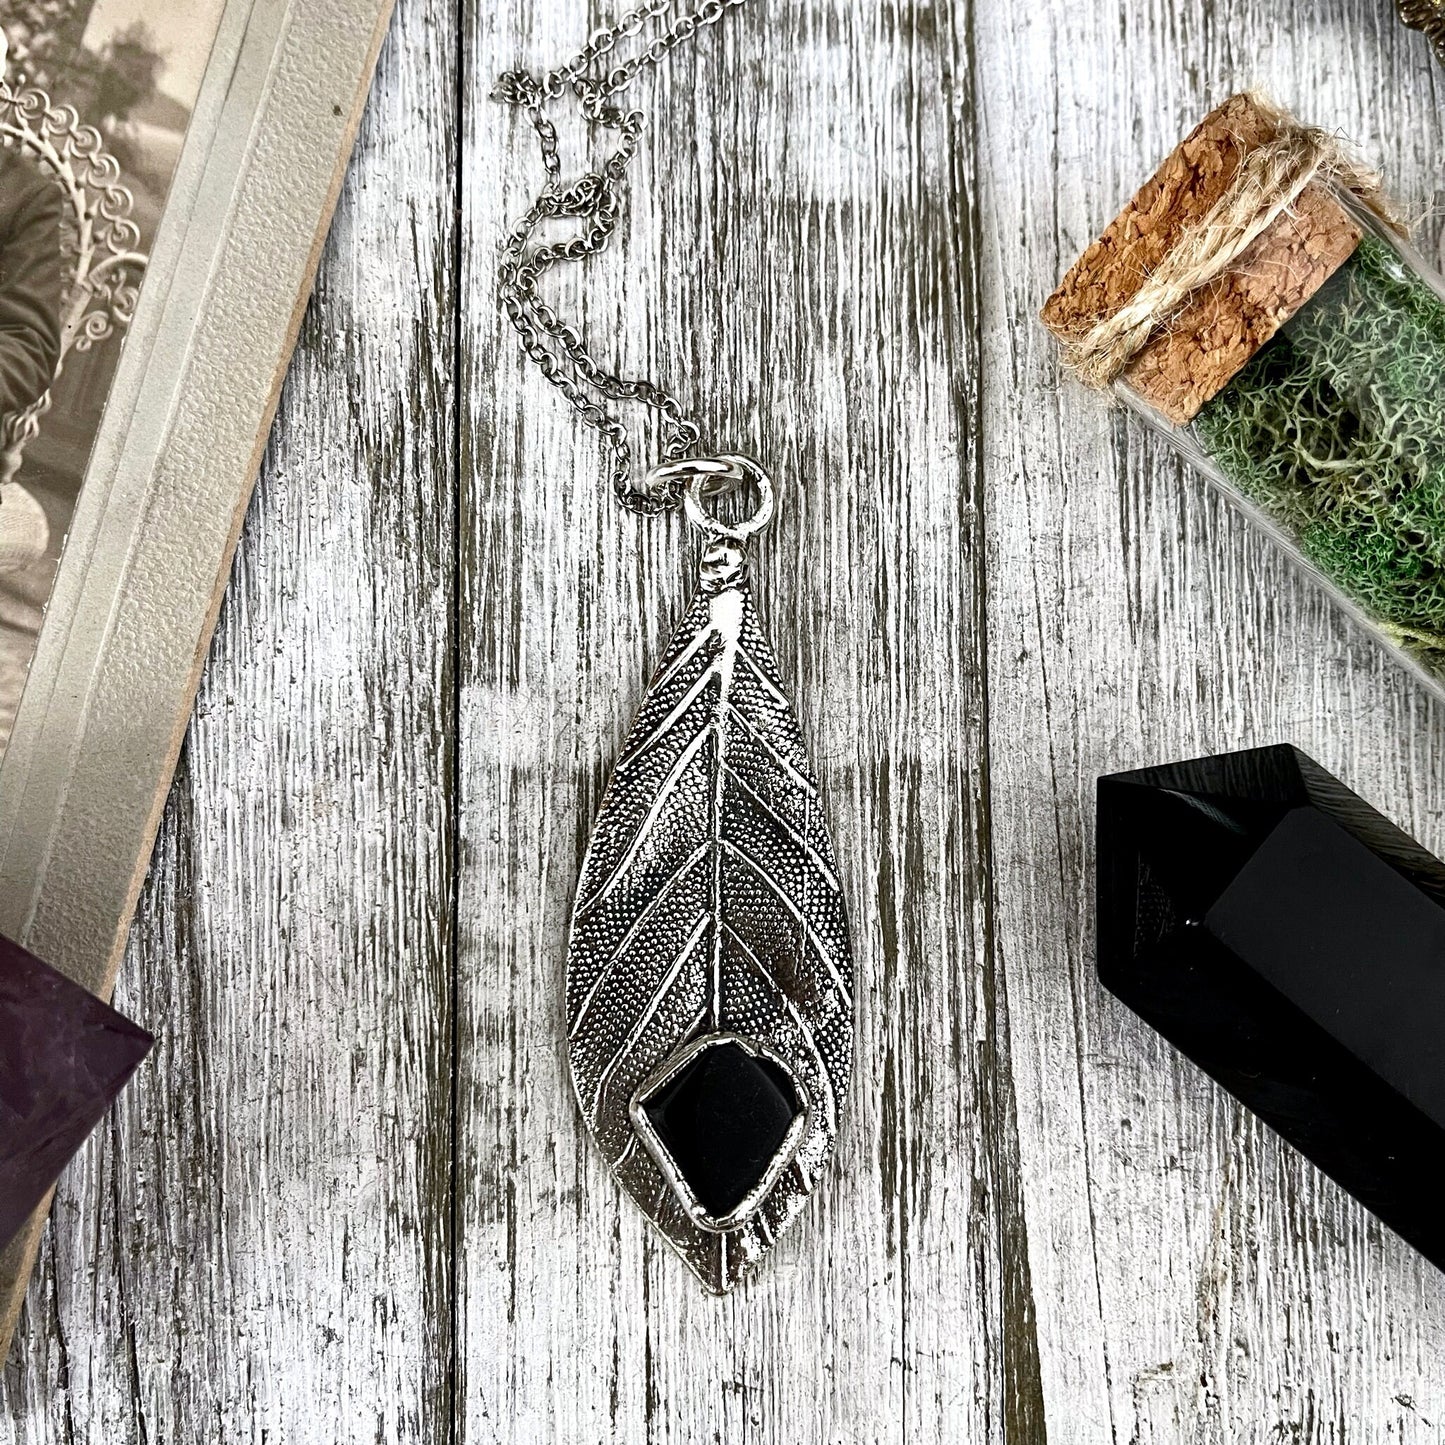 Black Onyx Leaf Necklace in Silver / Natural Wood & Stone Necklace Pendant - Foxlark Crystal Jewelry